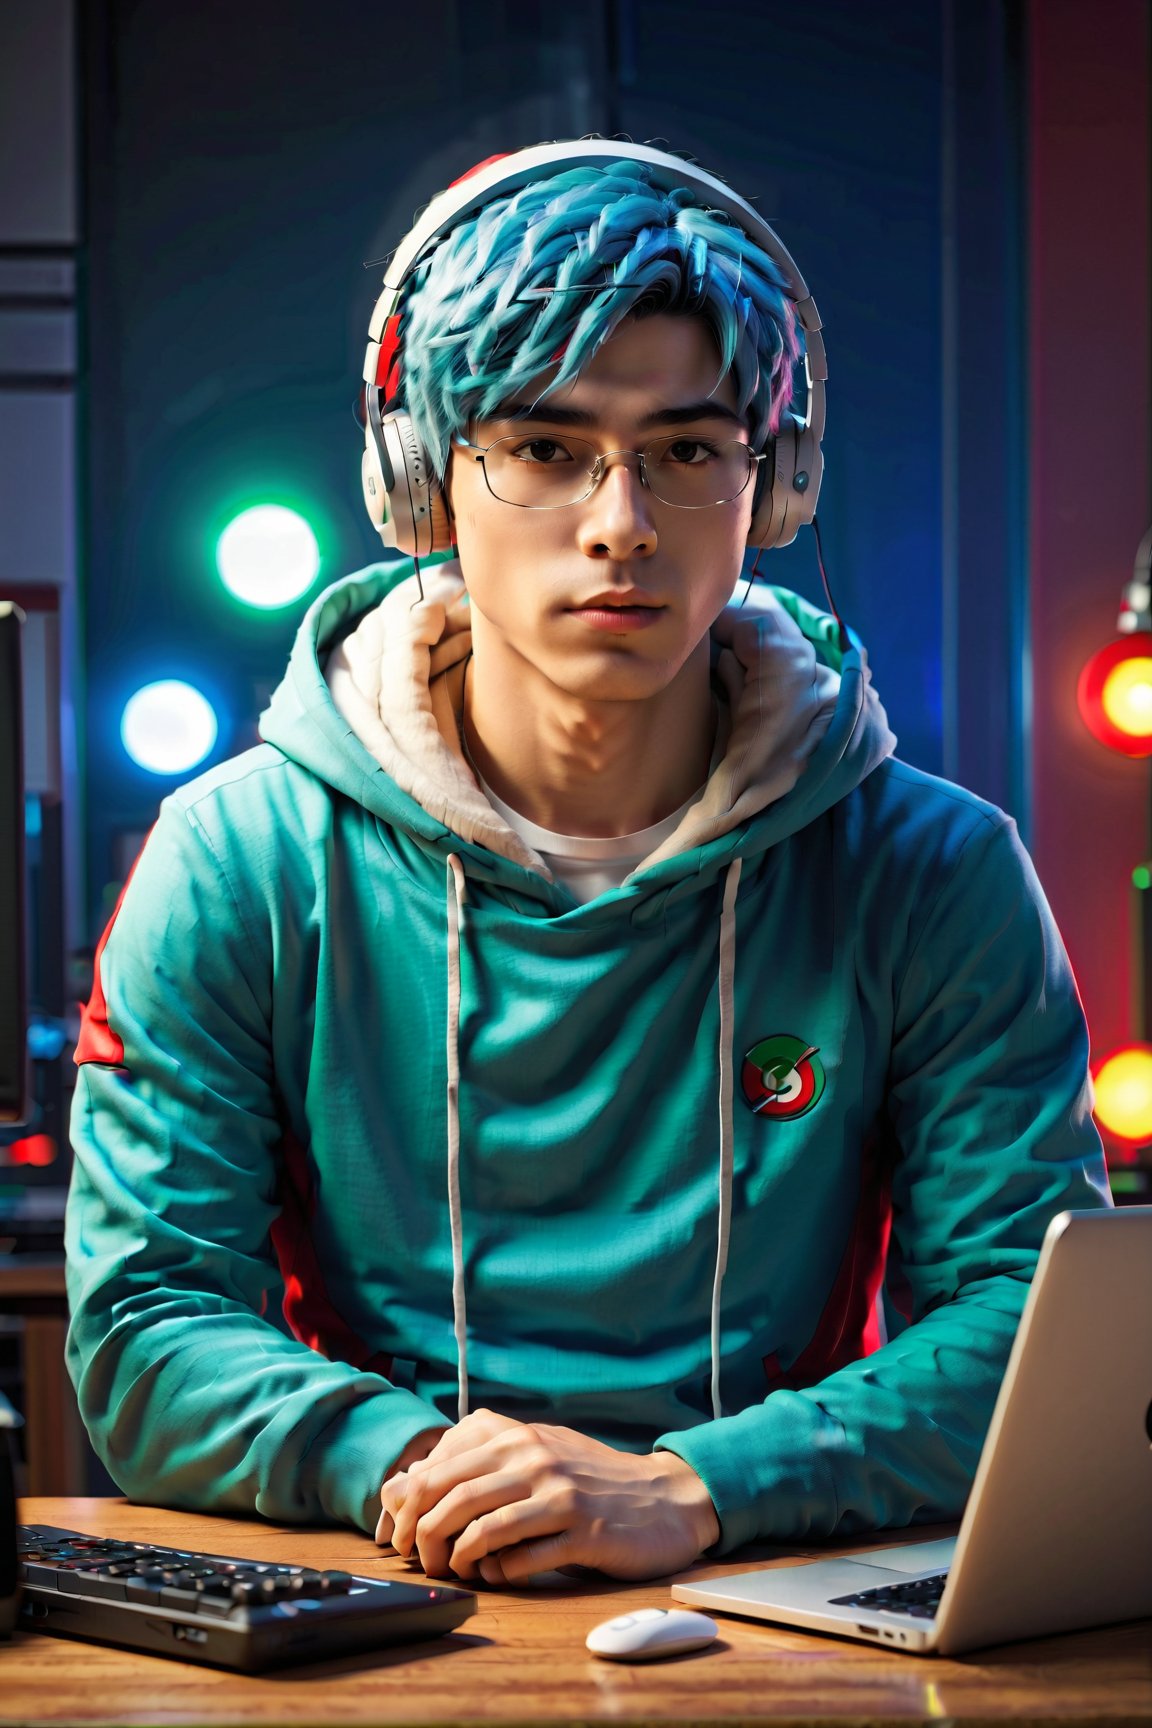 Geeky smart anime man wearing a blue Hoodie. He is sitting behind a laptop and a microphone. Studio anime style. Looking straight to camera centered Character portrait character in middle cool background with red and green and blue light

